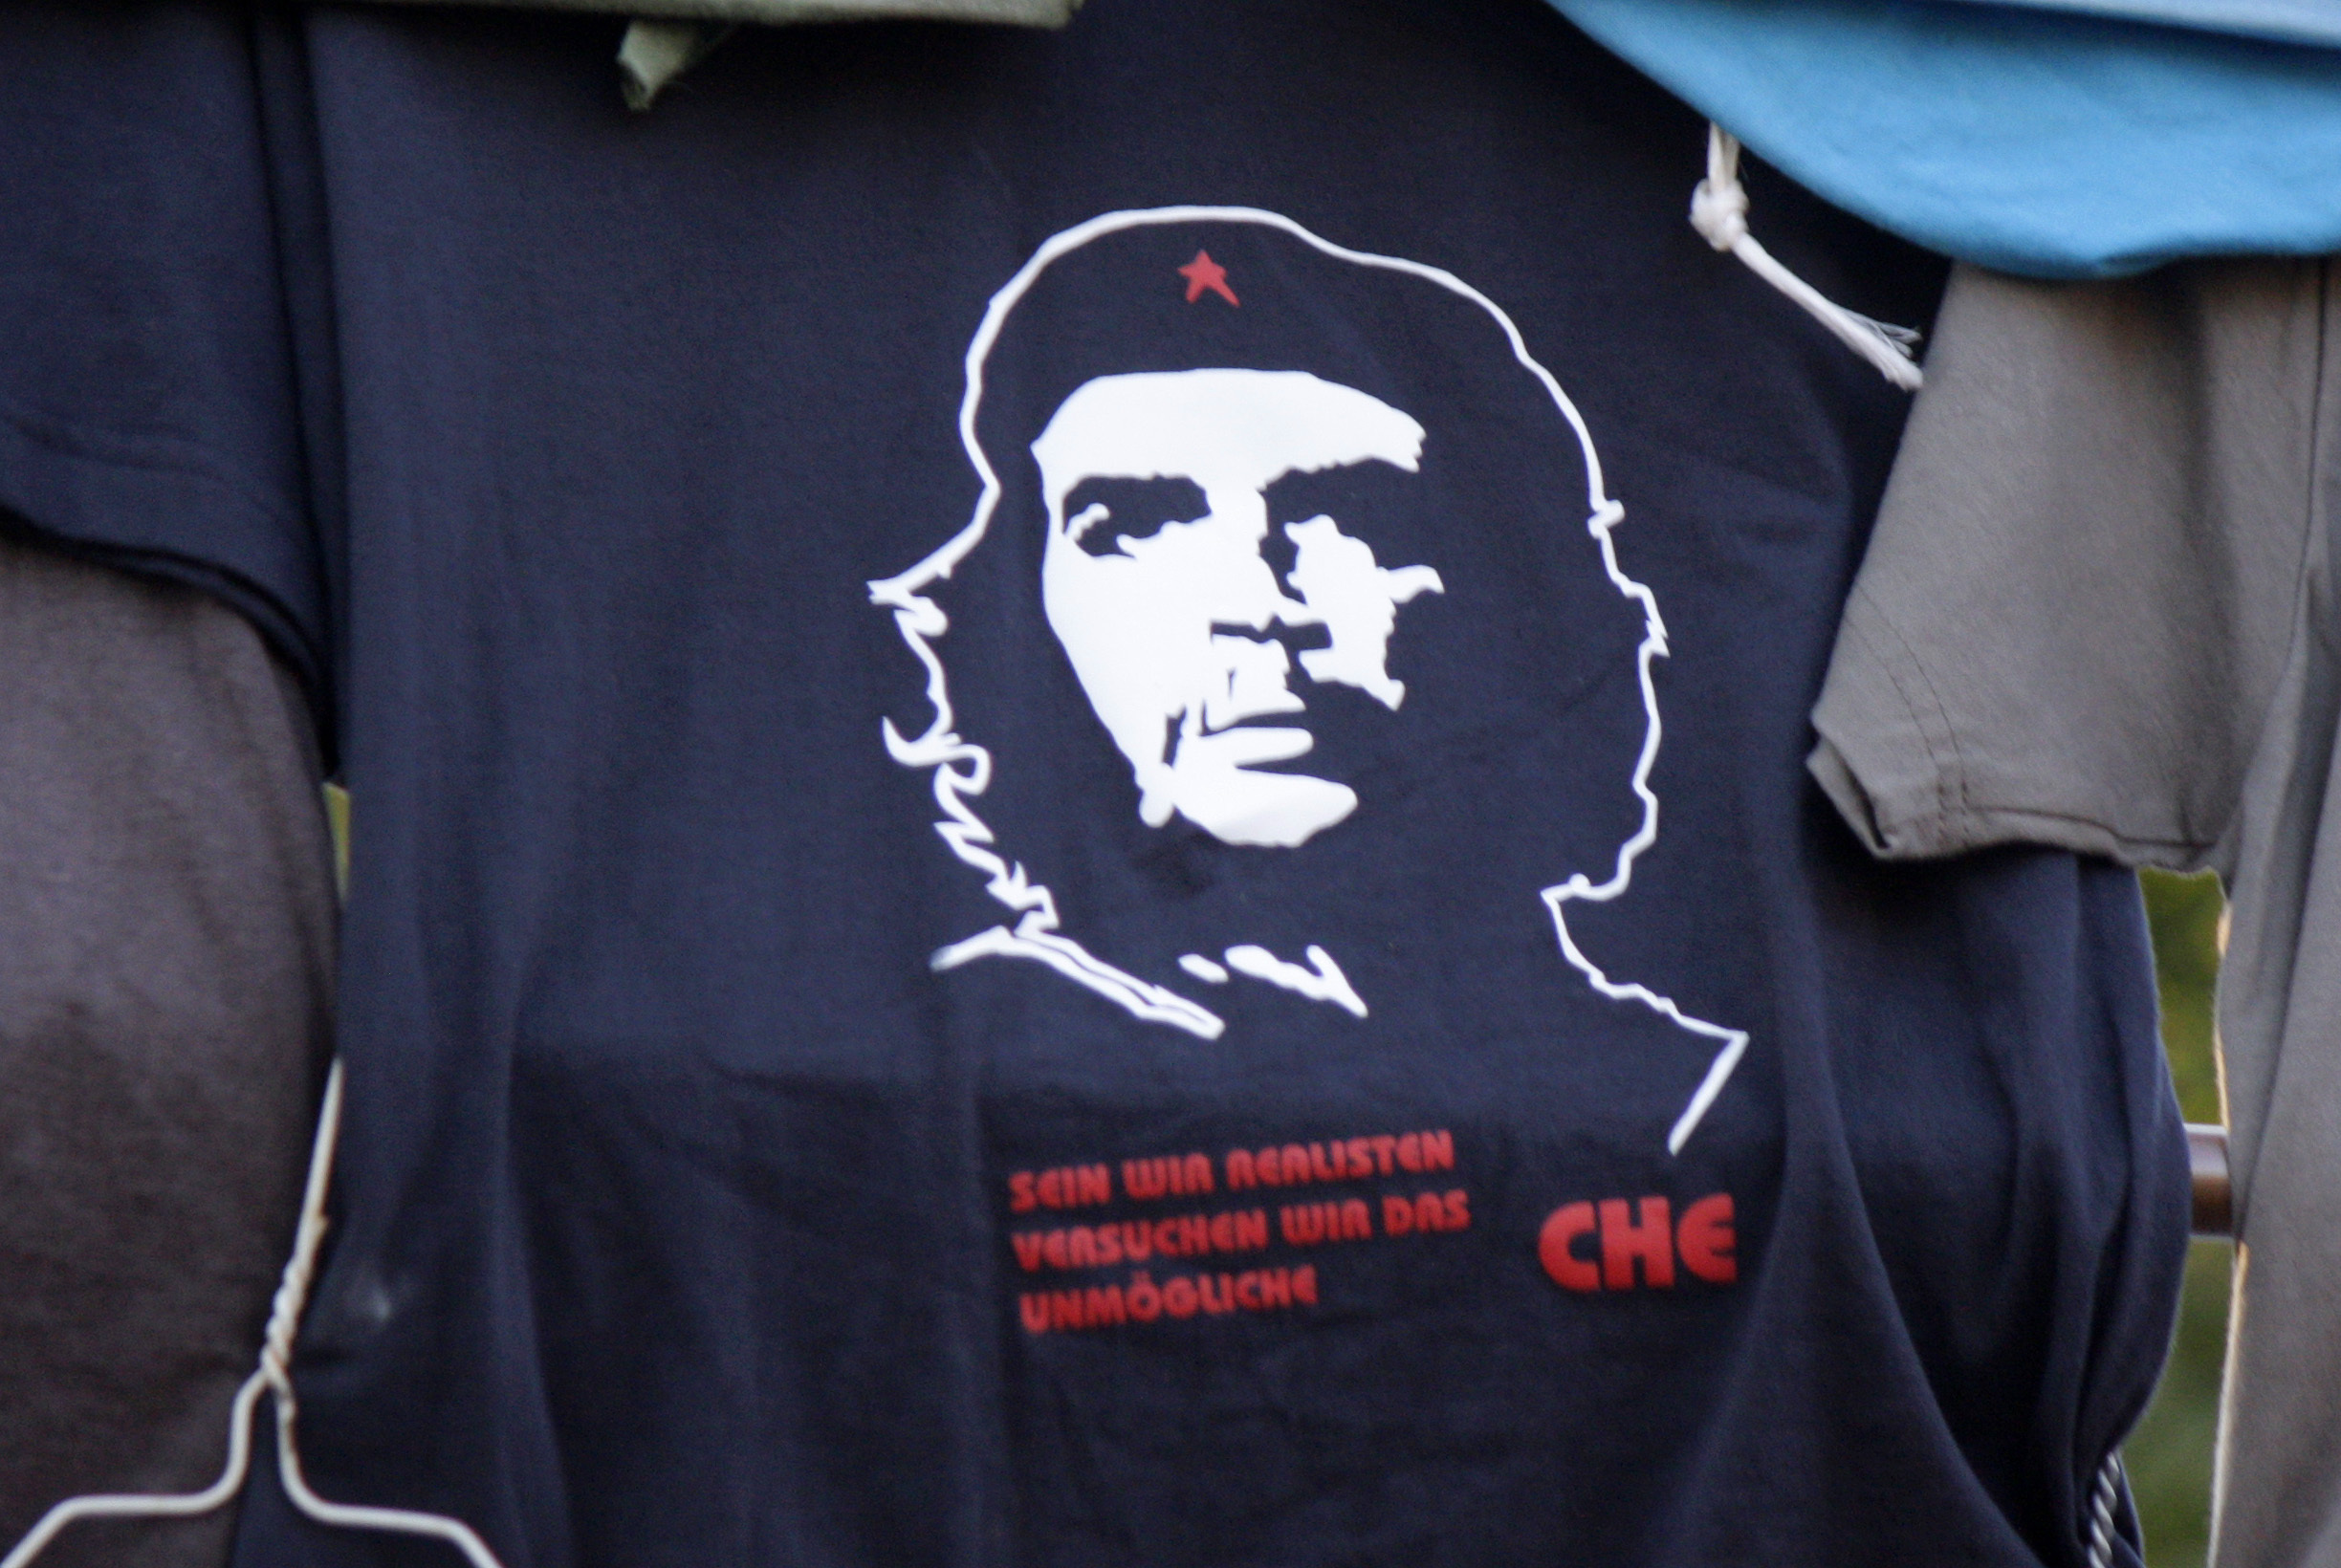 Photo (and Irony) of the Day – Protesting violence and racism while wearing  a Che Guevara shirt